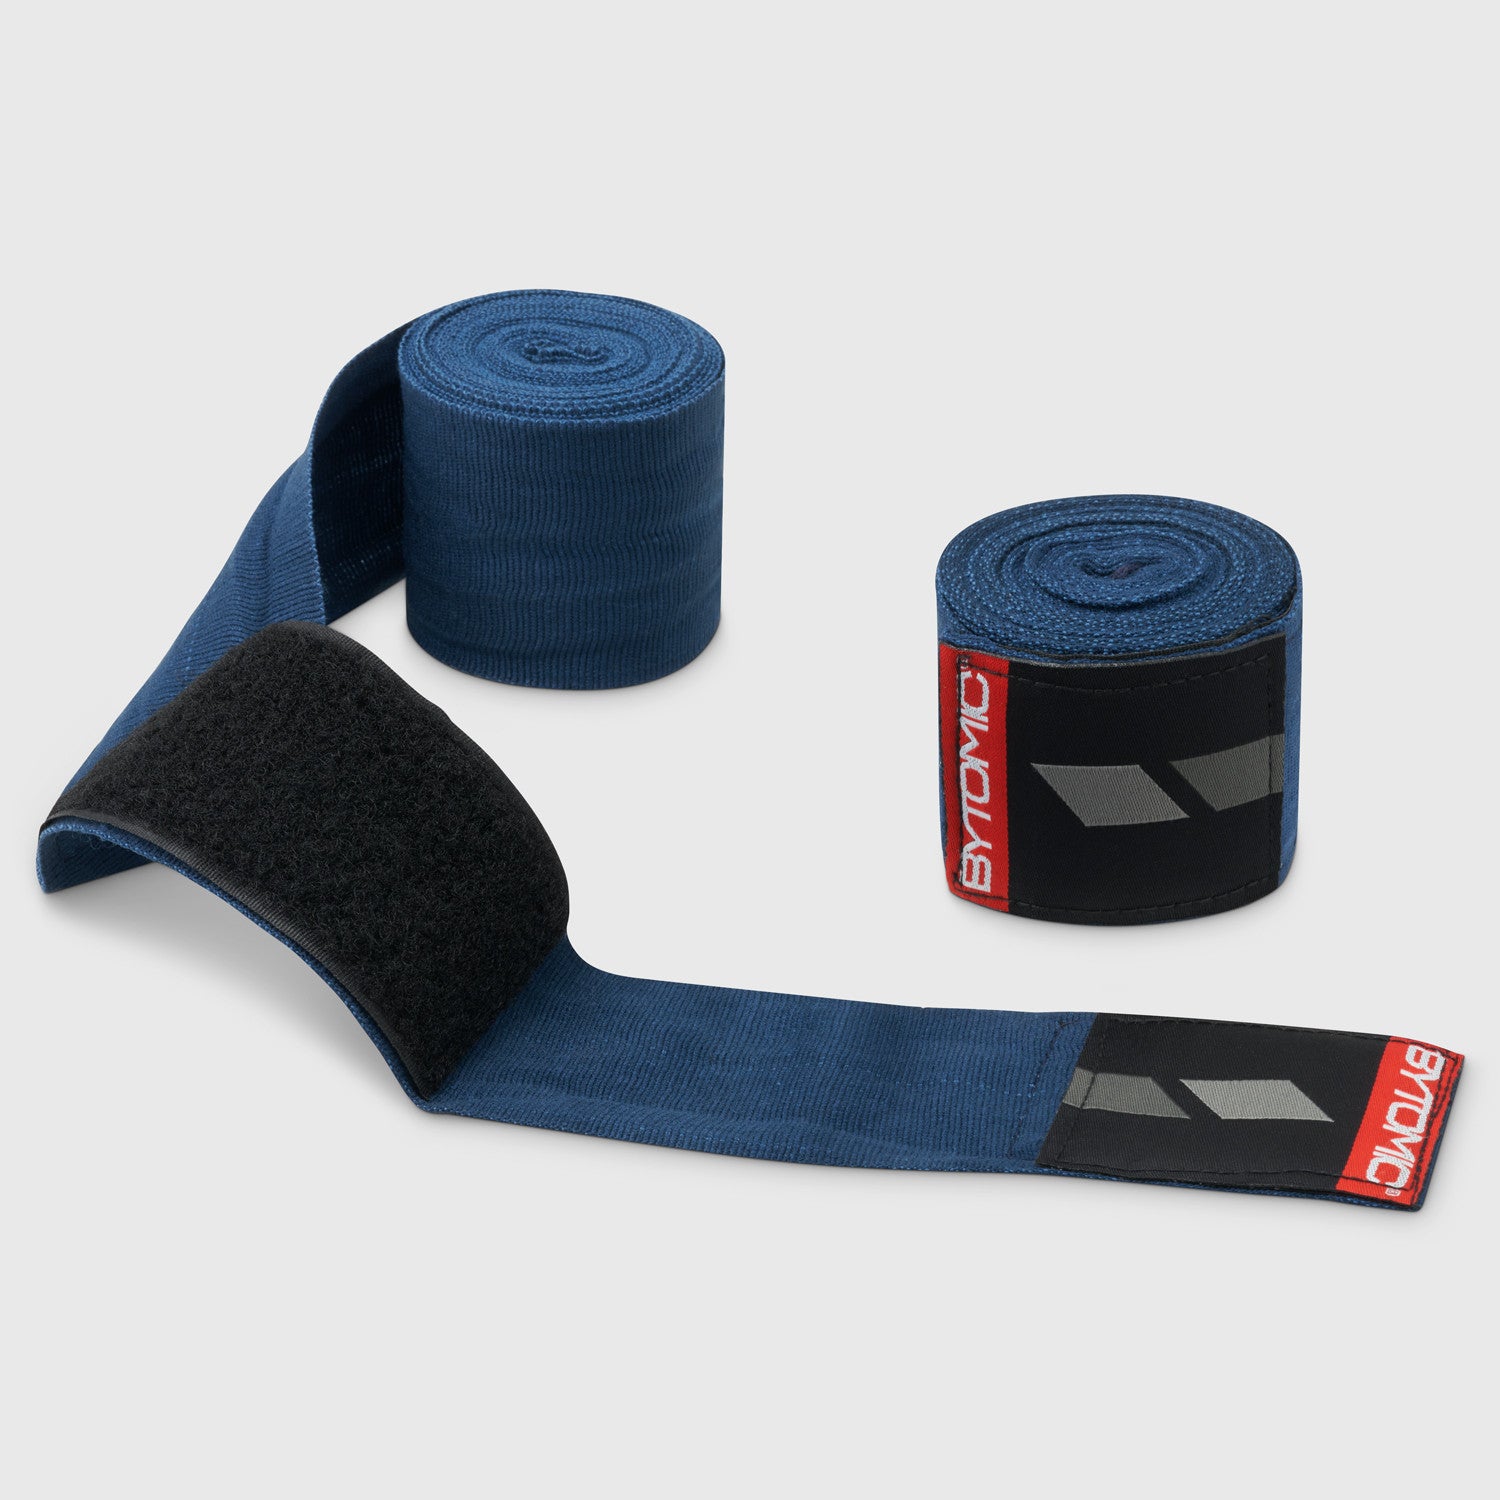 BYTOMIC RED LABEL MEXICAN HAND WRAPS BLUE